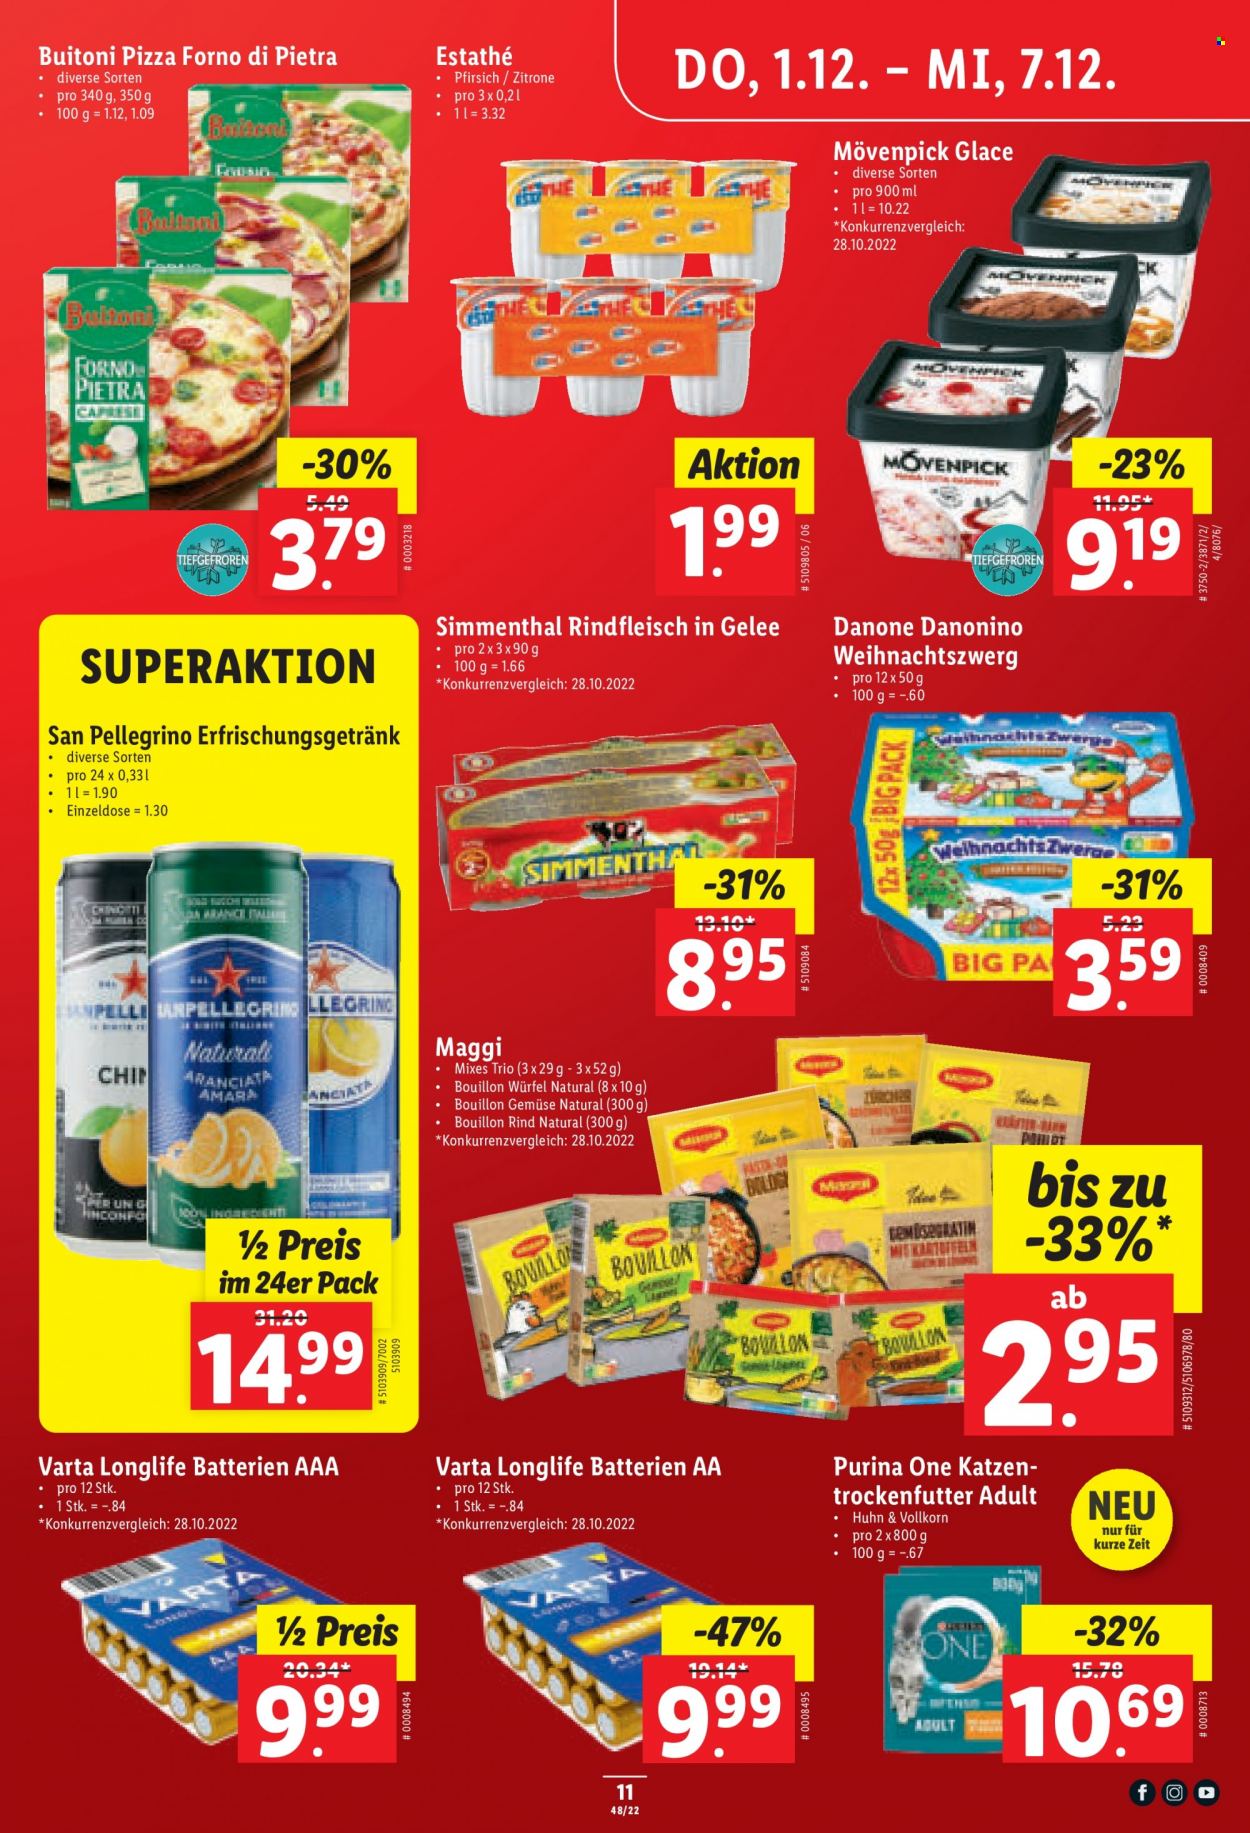 Catalogue Lidl - 1.12.2022 - 7.12.2022. Page 11.